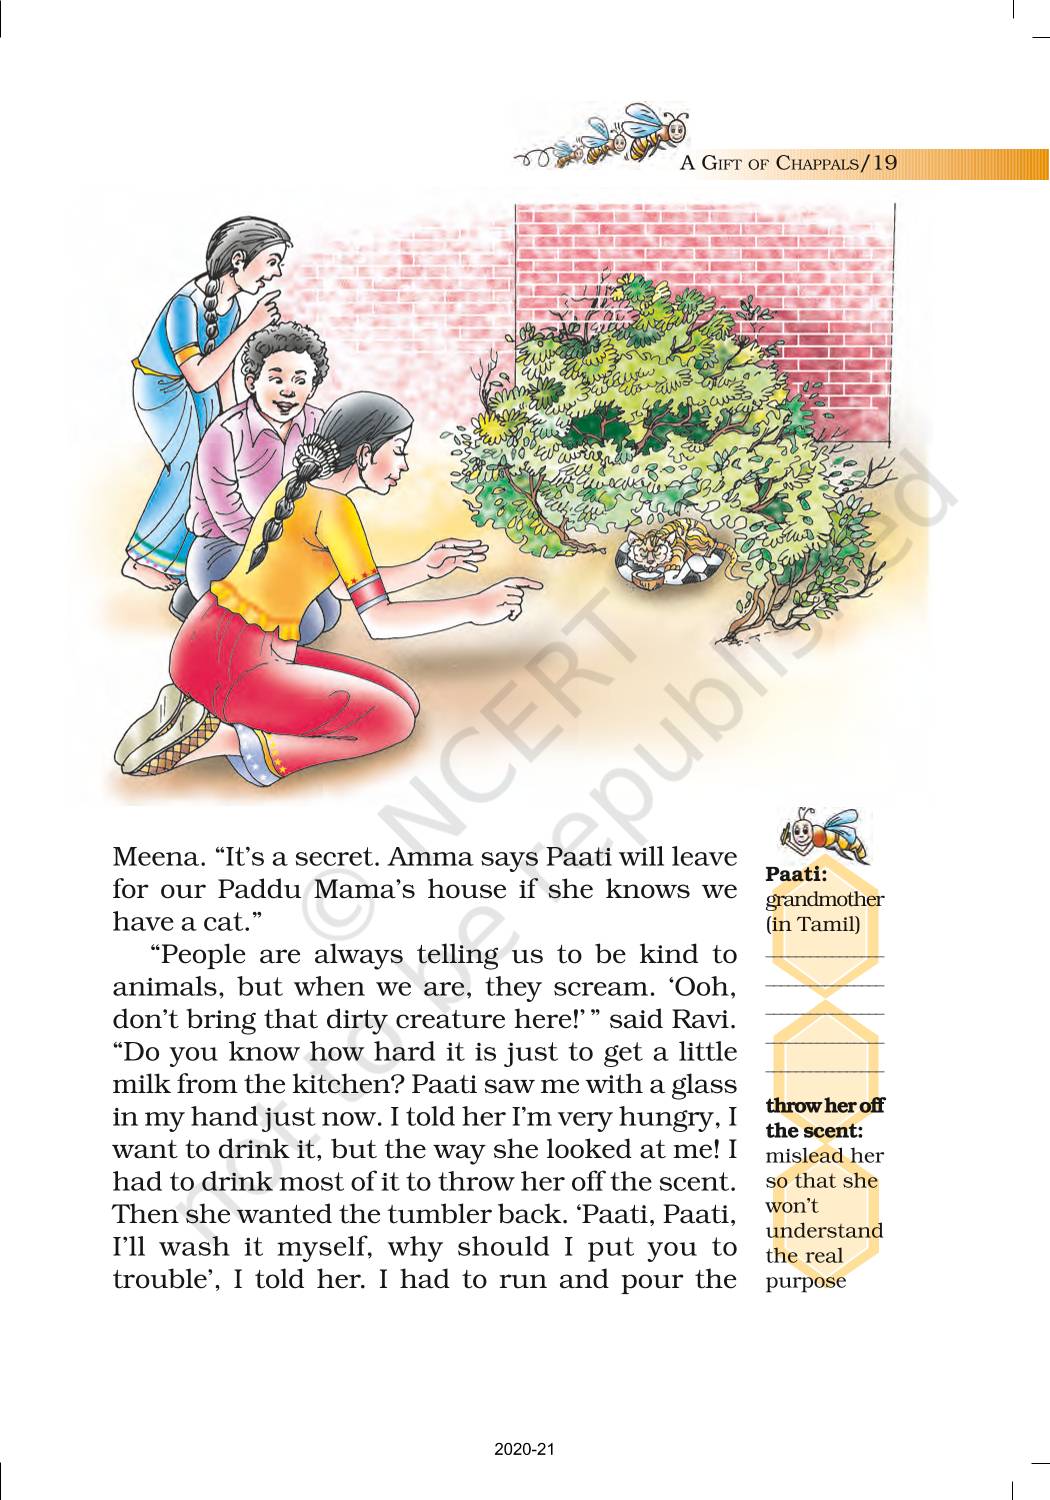 Class 7 English ch 2 A gift of chappals​ - Brainly.in